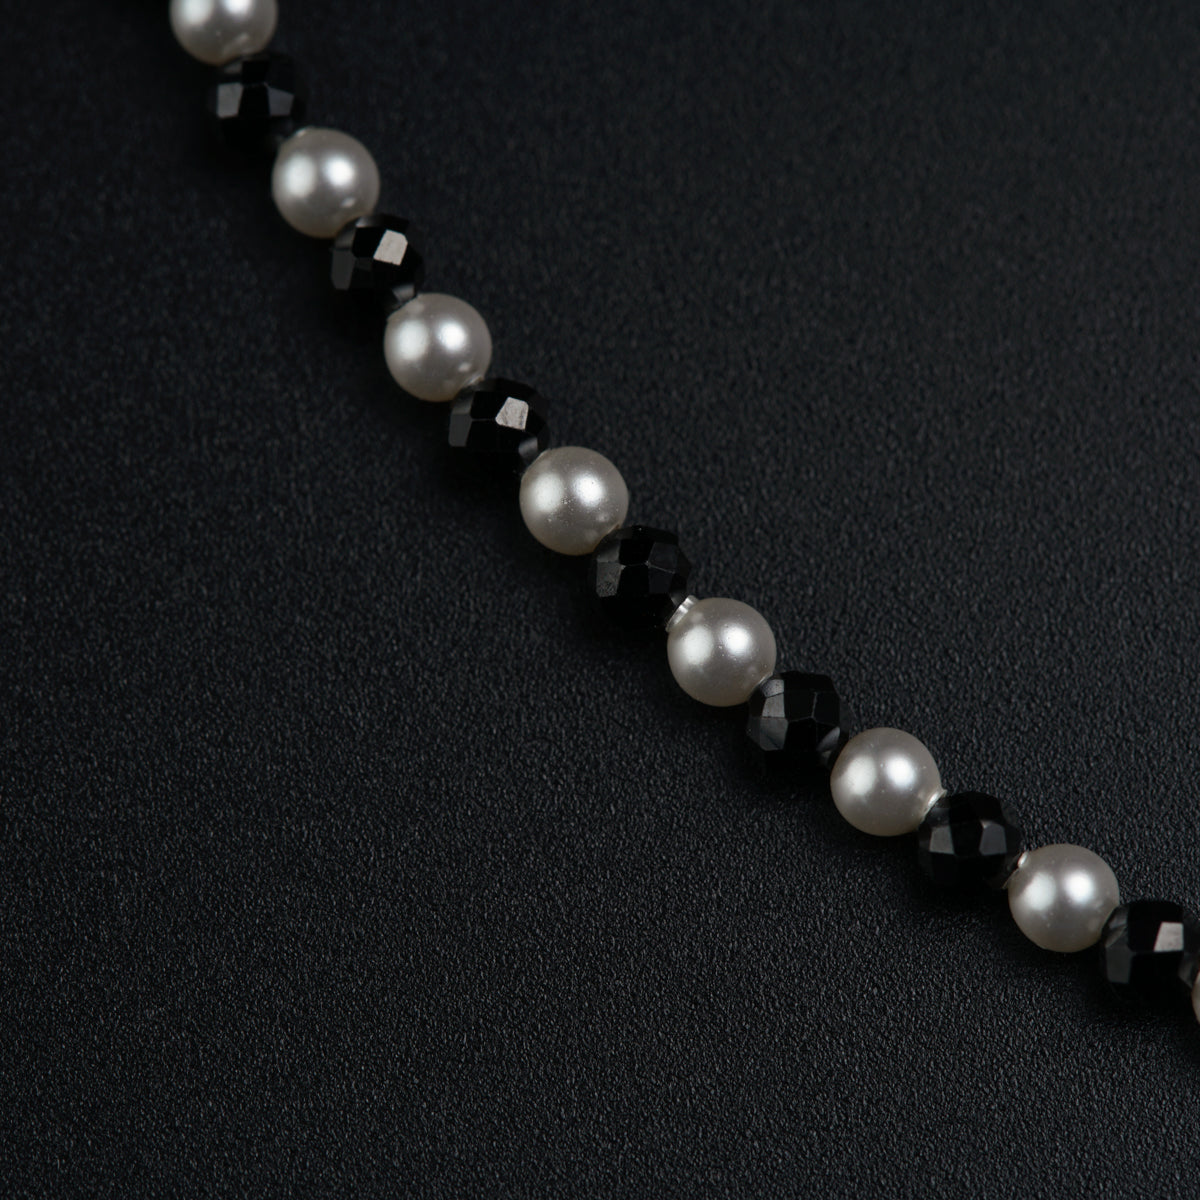 Daily Wear Necklace-Black Spinel and Pearls